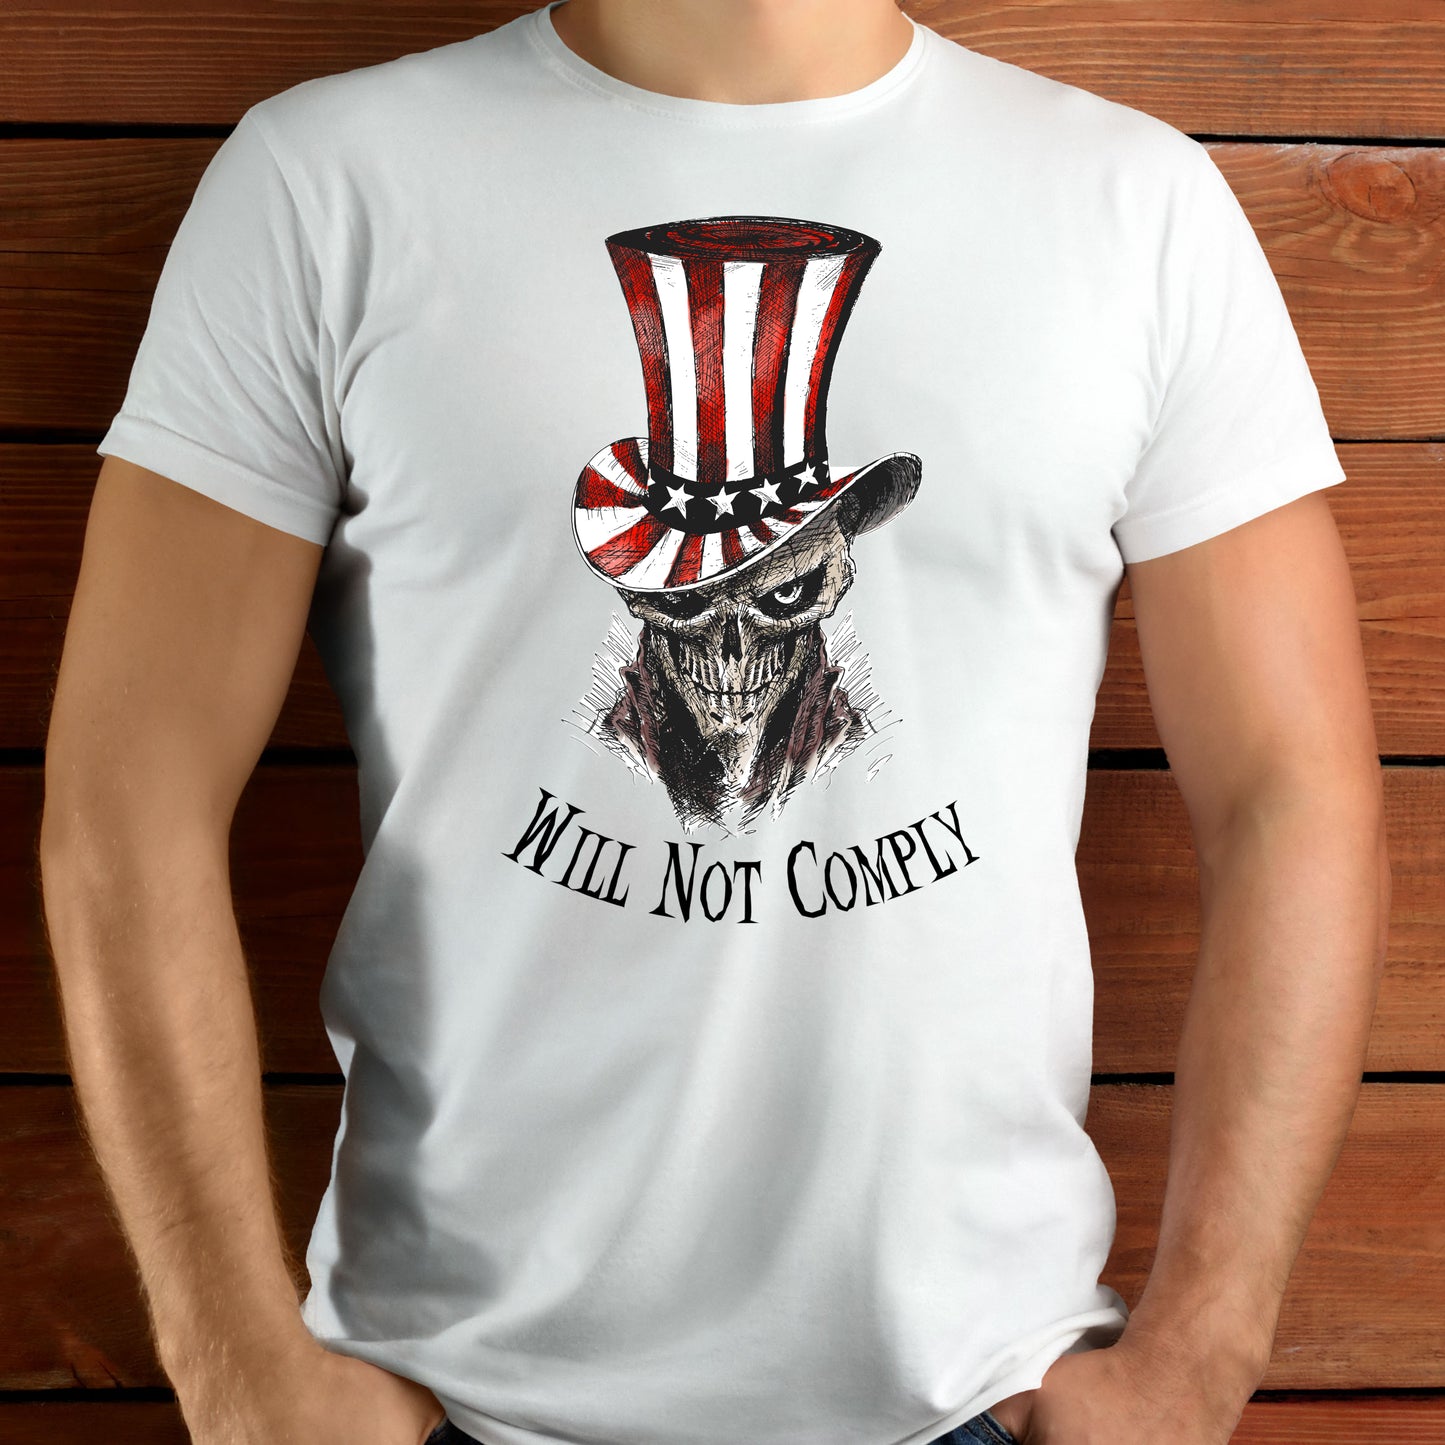 Will Not Comply T-Shirt For Conservative TShirt Patriotic Shirt For Republican T Shirt Tyranny Shirt Uncle Sam T-Shirt For Freedom Tee Shirt